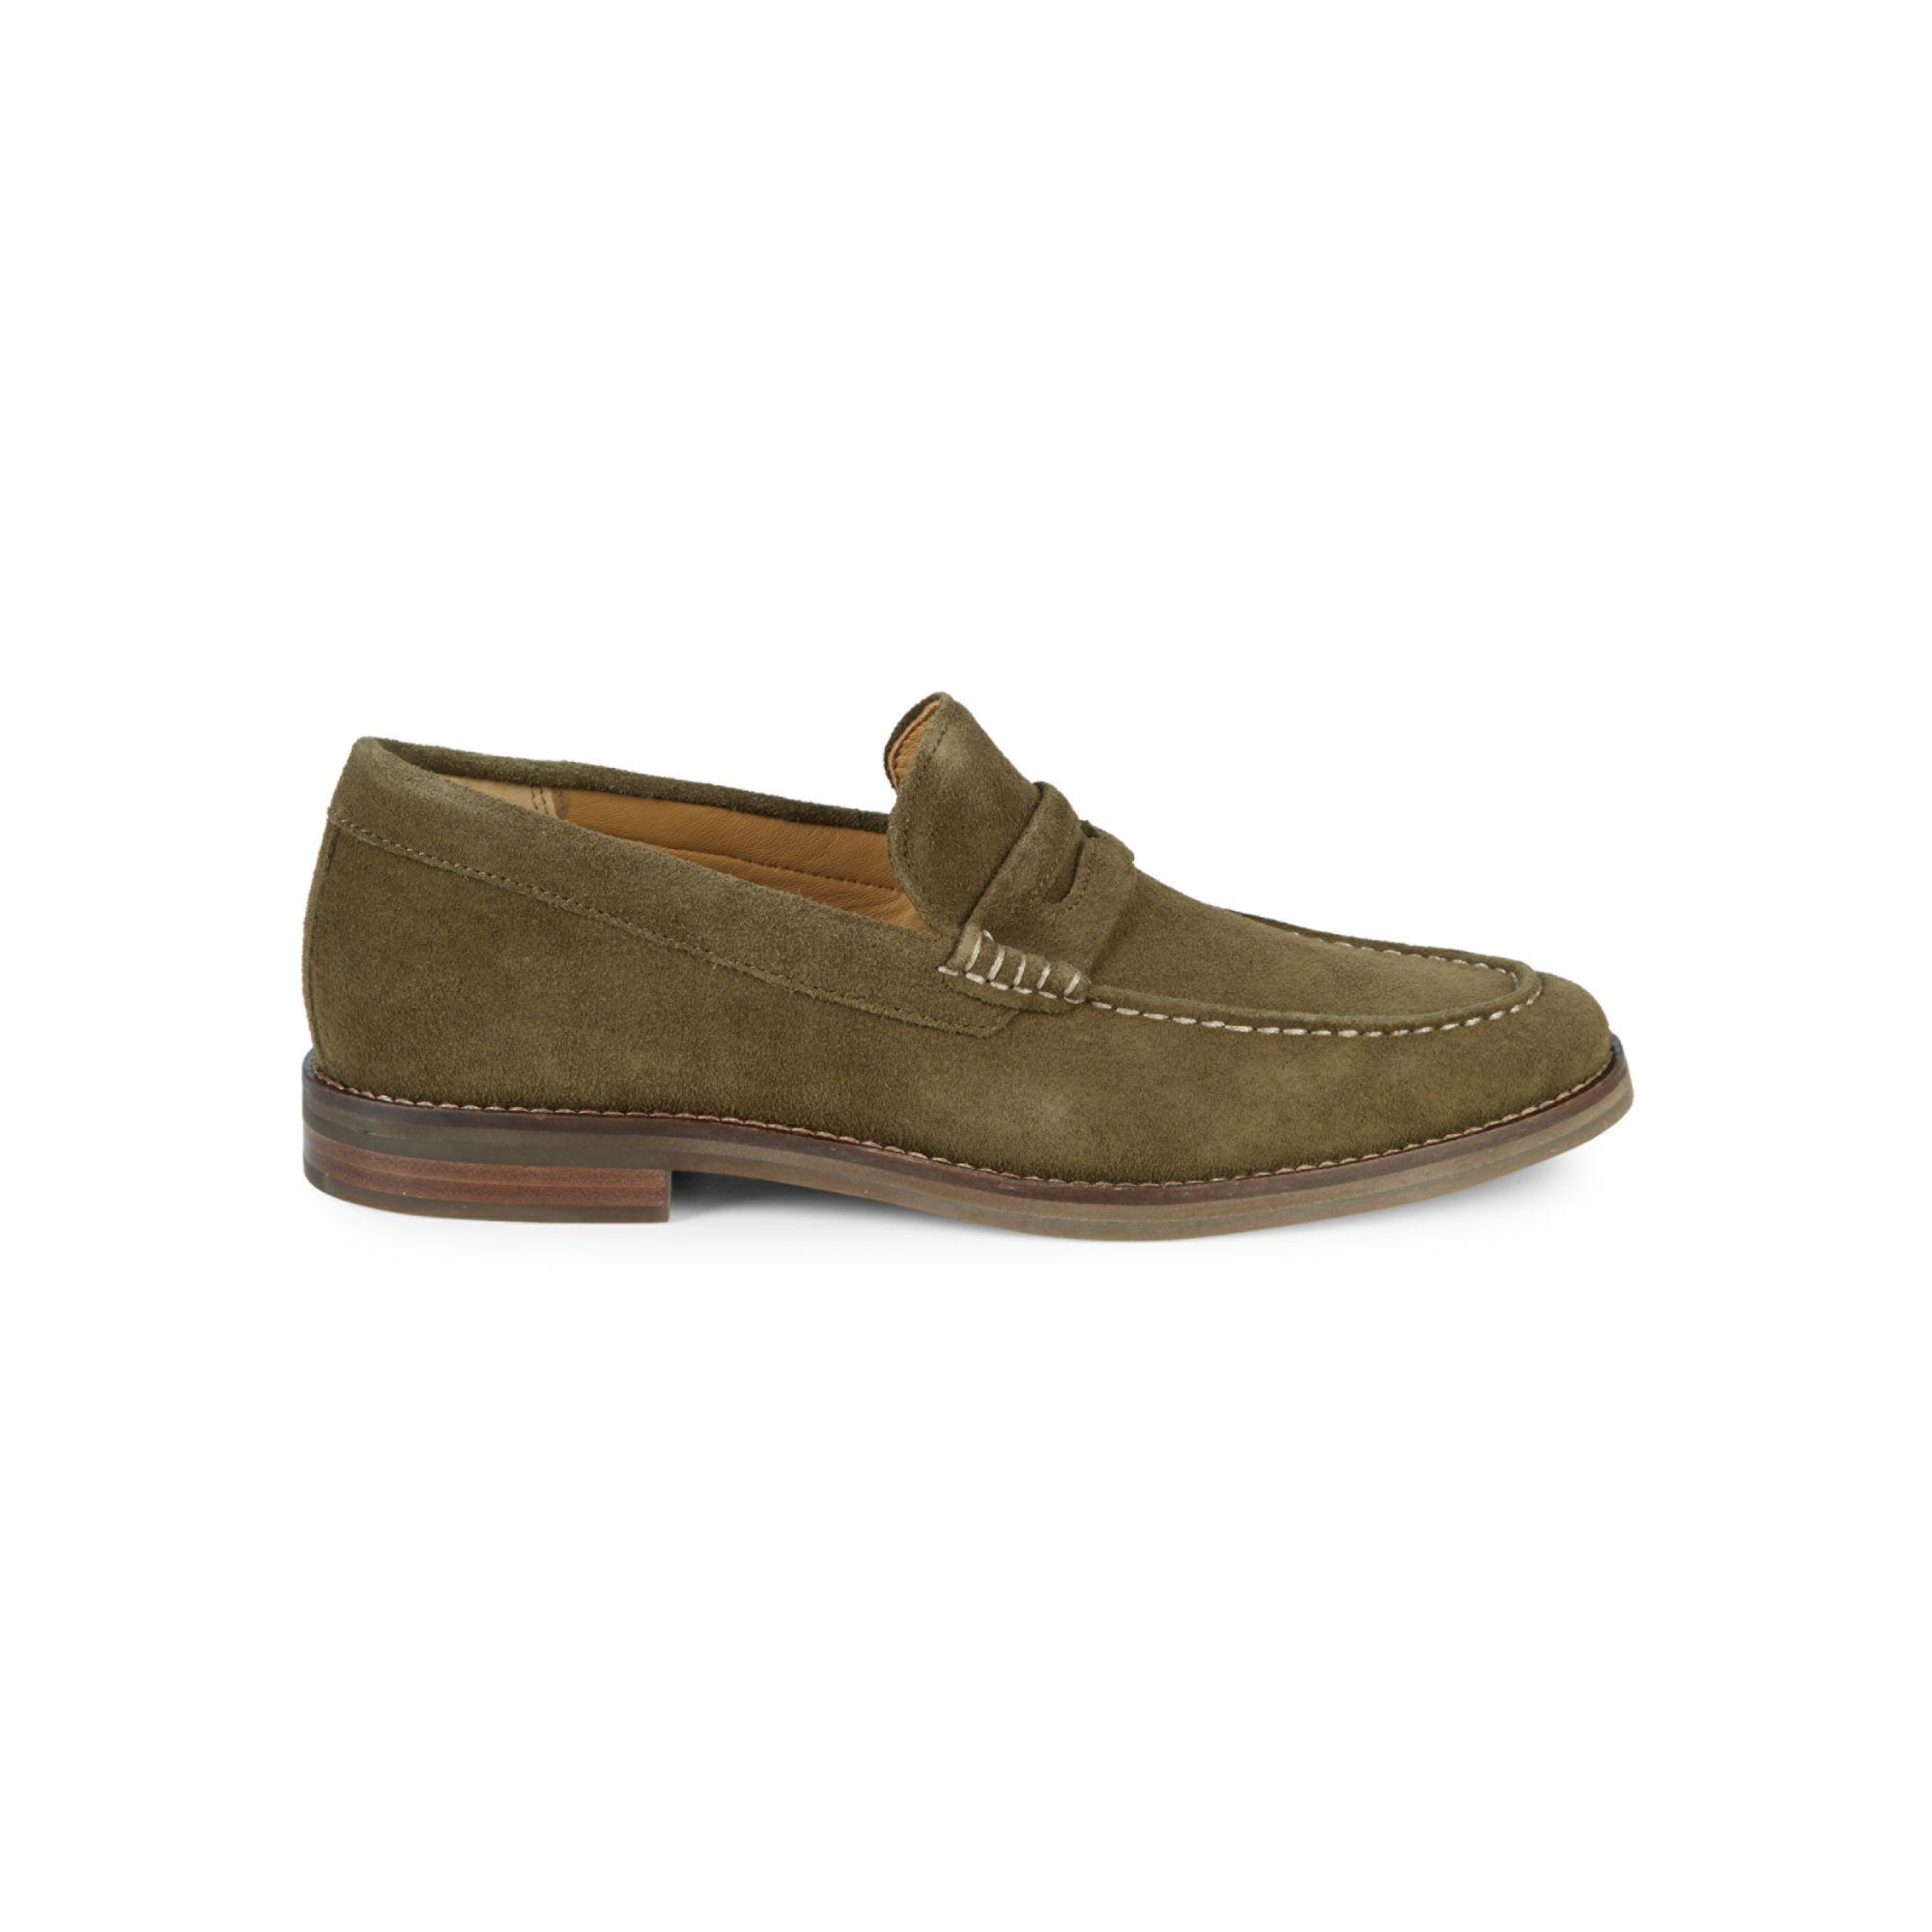 Sperry Top-Sider Suede Penny Loafers in Olive (Green) for Men - Save 65 ...